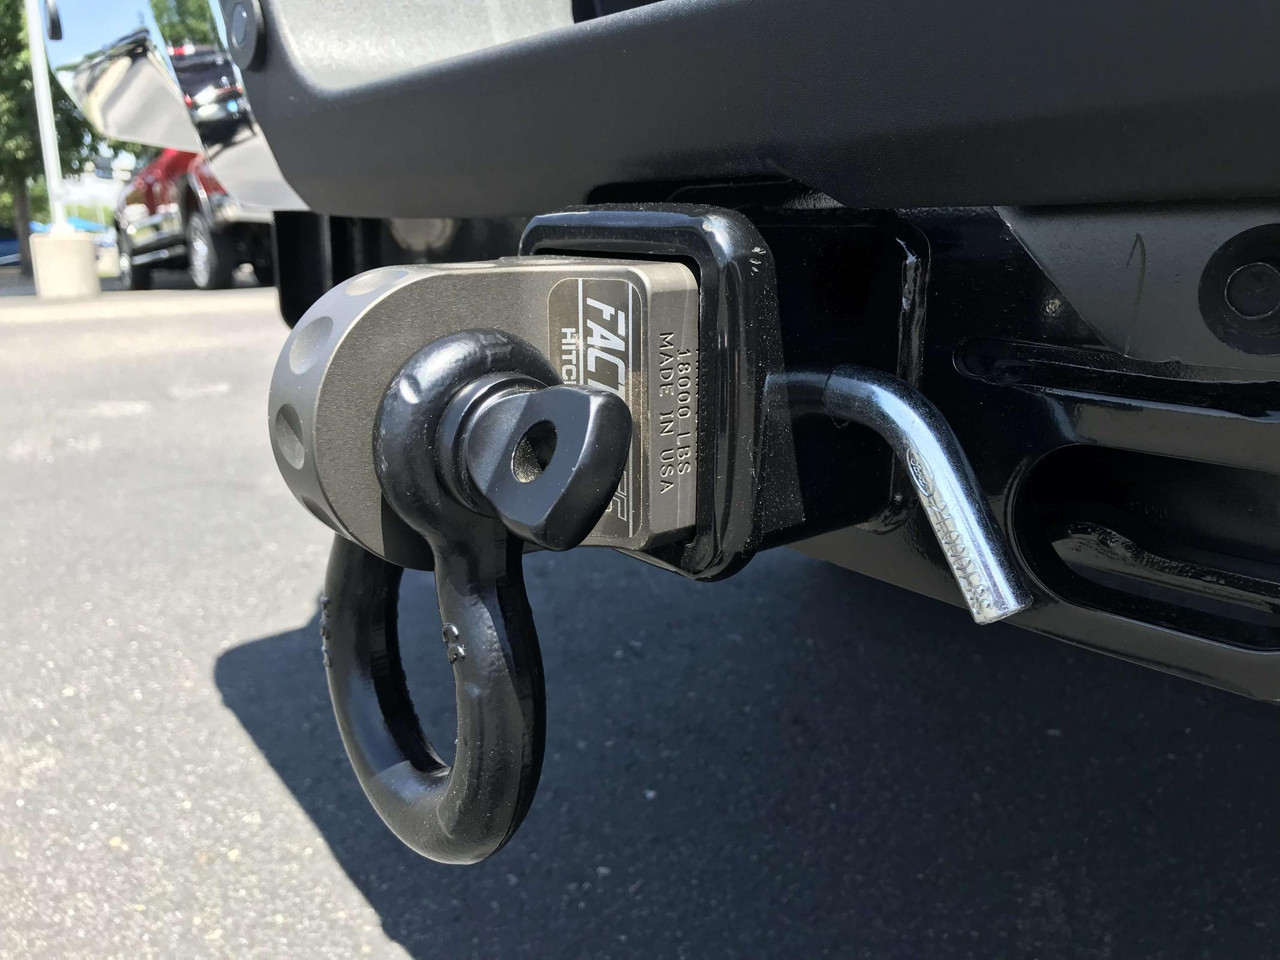 FACTOR 55 HitchLink 3.0 Reciever Shackle Mount, Inch Receivers